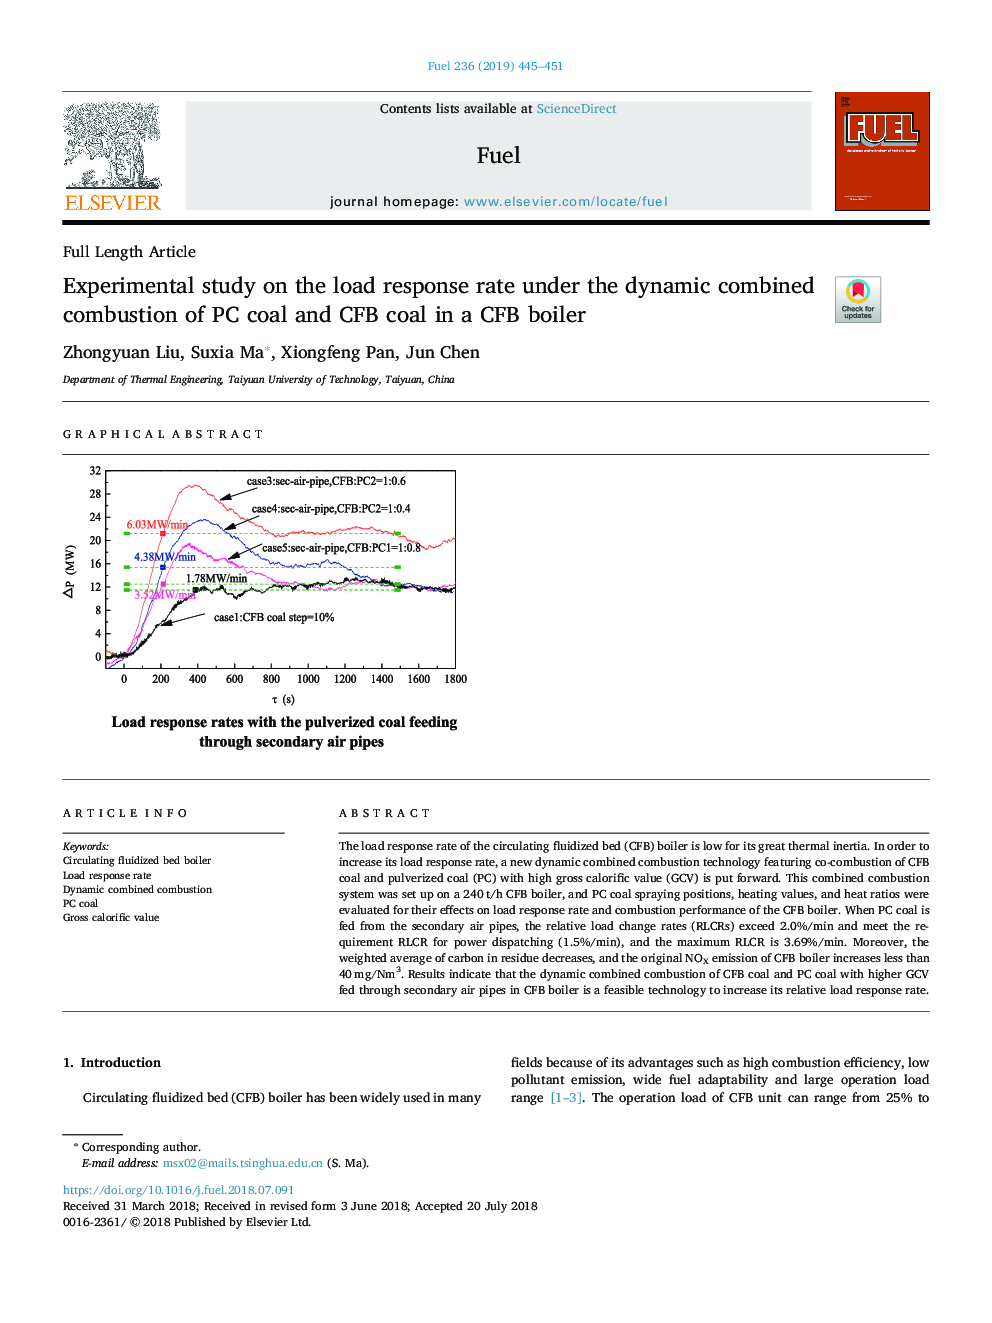 Experimental study on the load response rate under the dynamic combined combustion of PC coal and CFB coal in a CFB boiler